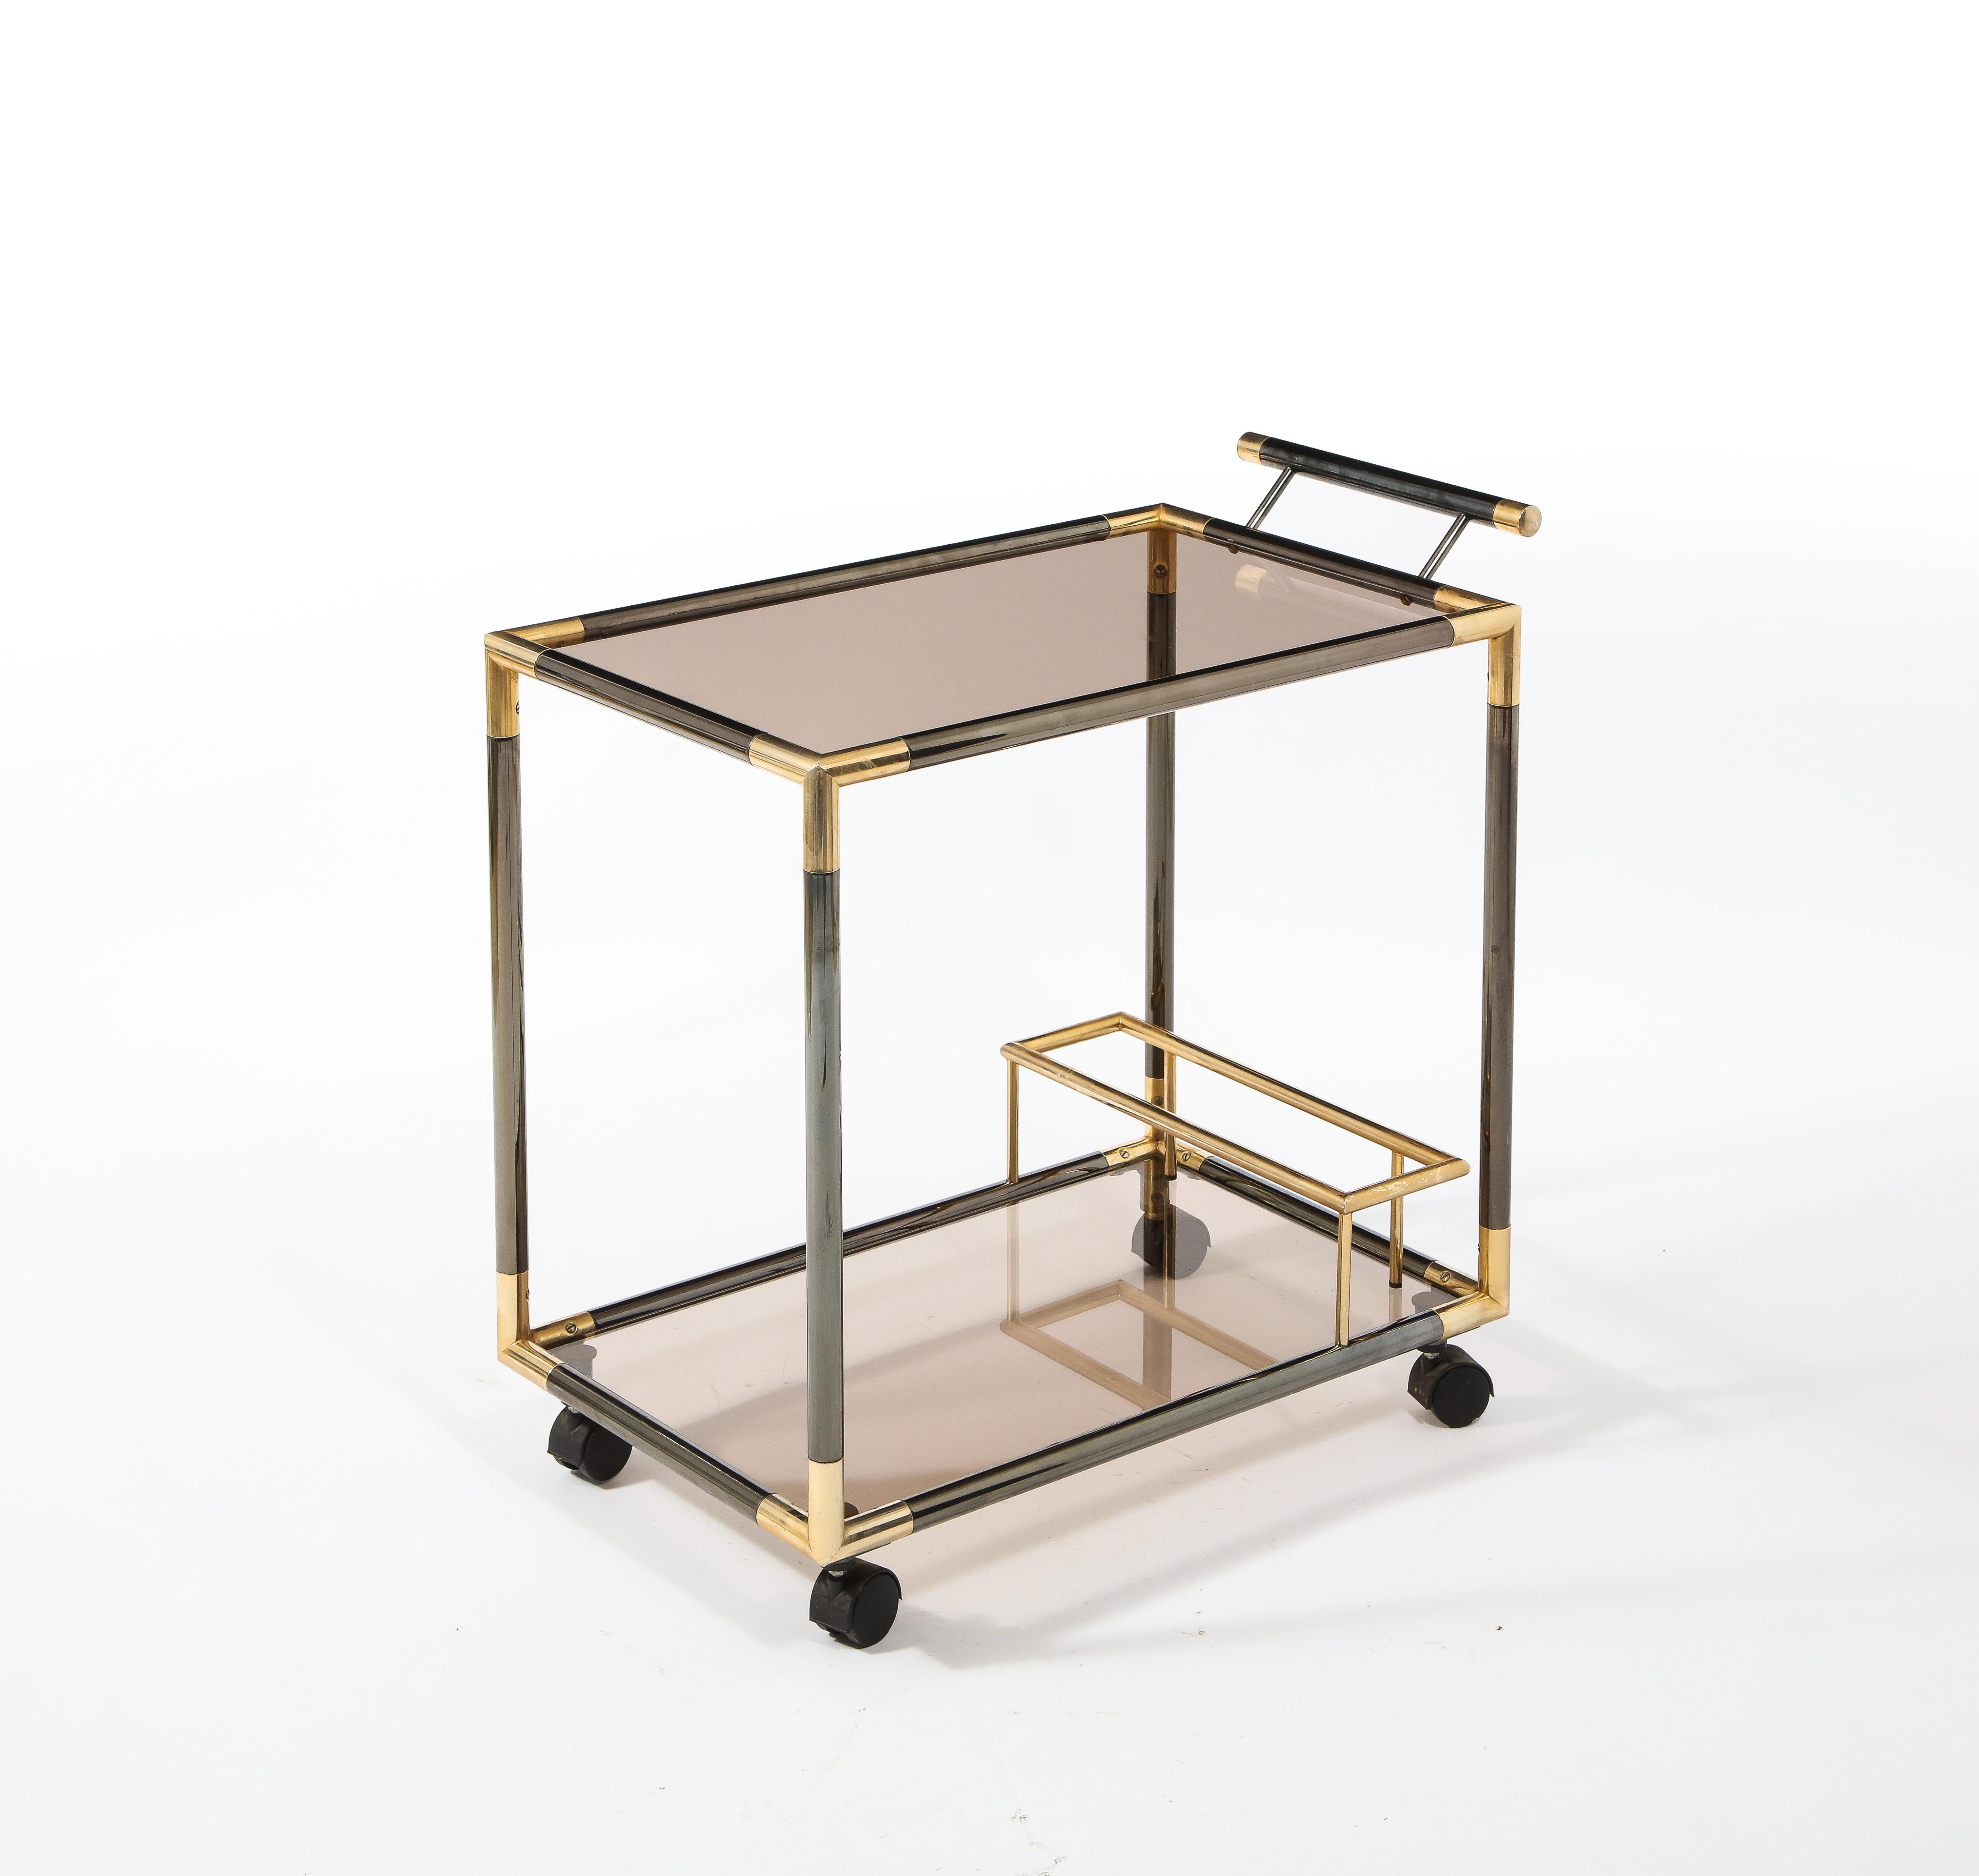 A two-tone brass bar cart with smoked glass shelves.